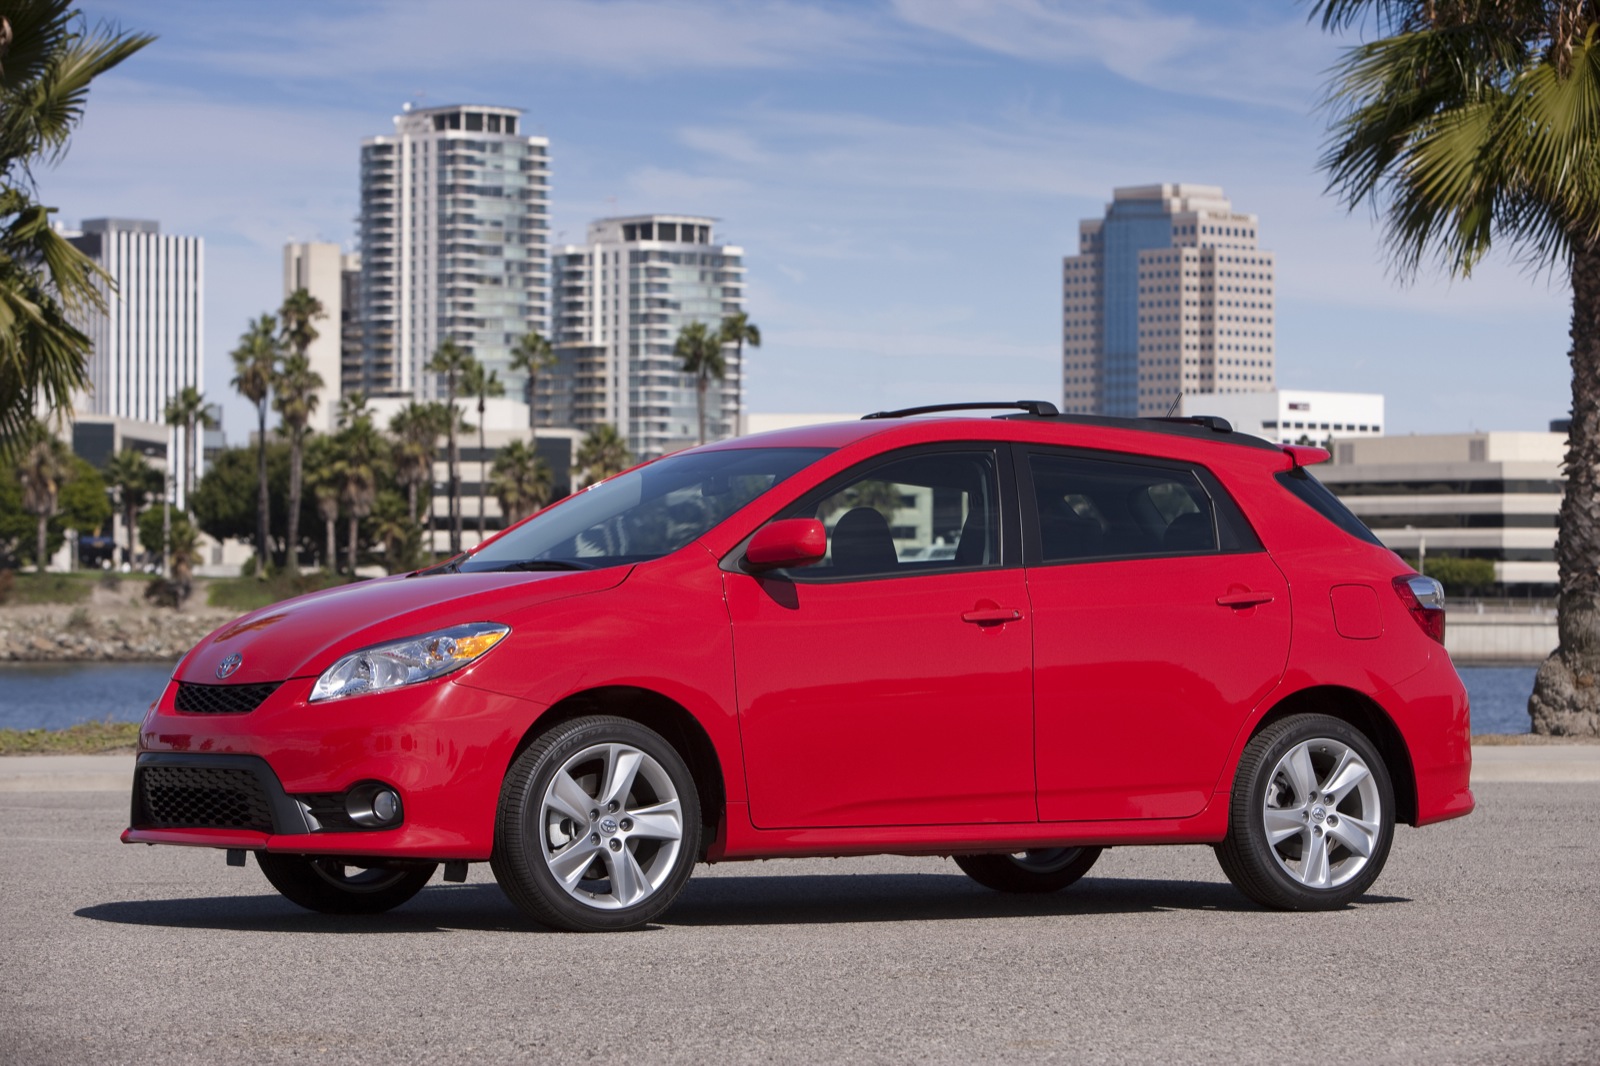 2013 Toyota Matrix: Last Model Year In U.S. For Compact Hatchback